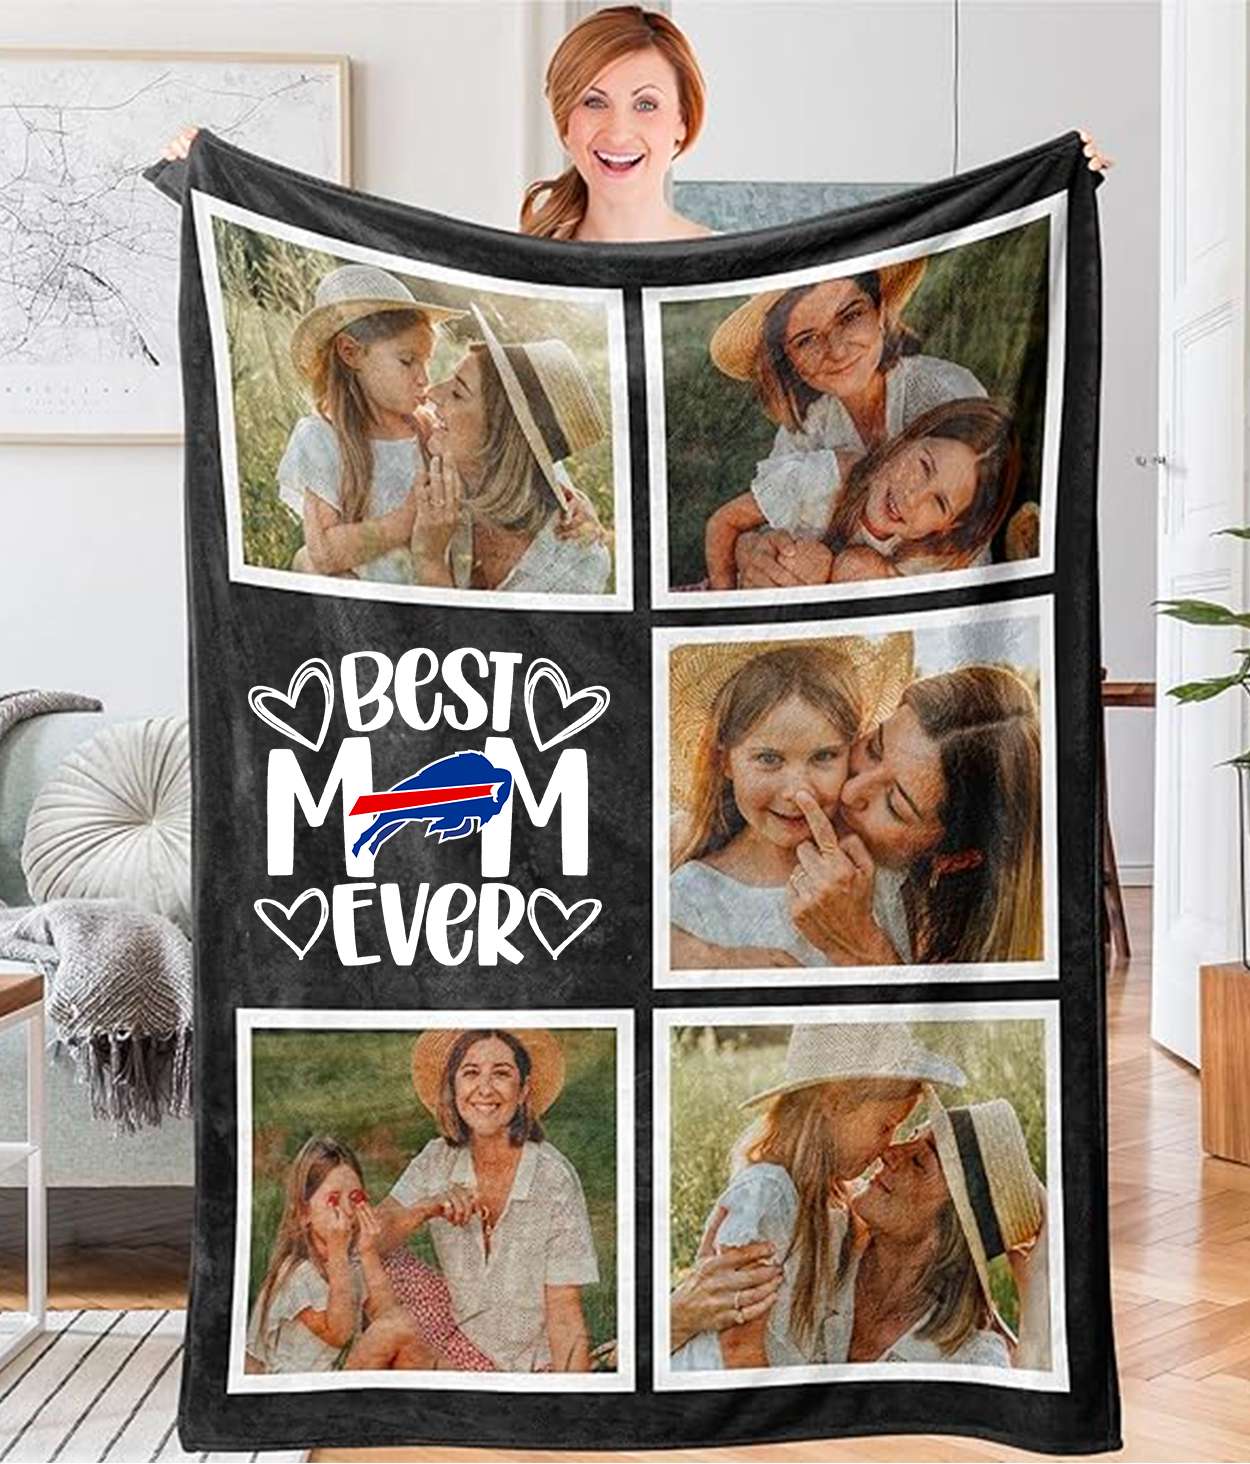 Best Mom Ever - Custom NFL Buffalo Bills Blankets with Pictures for Mother's Day Gift